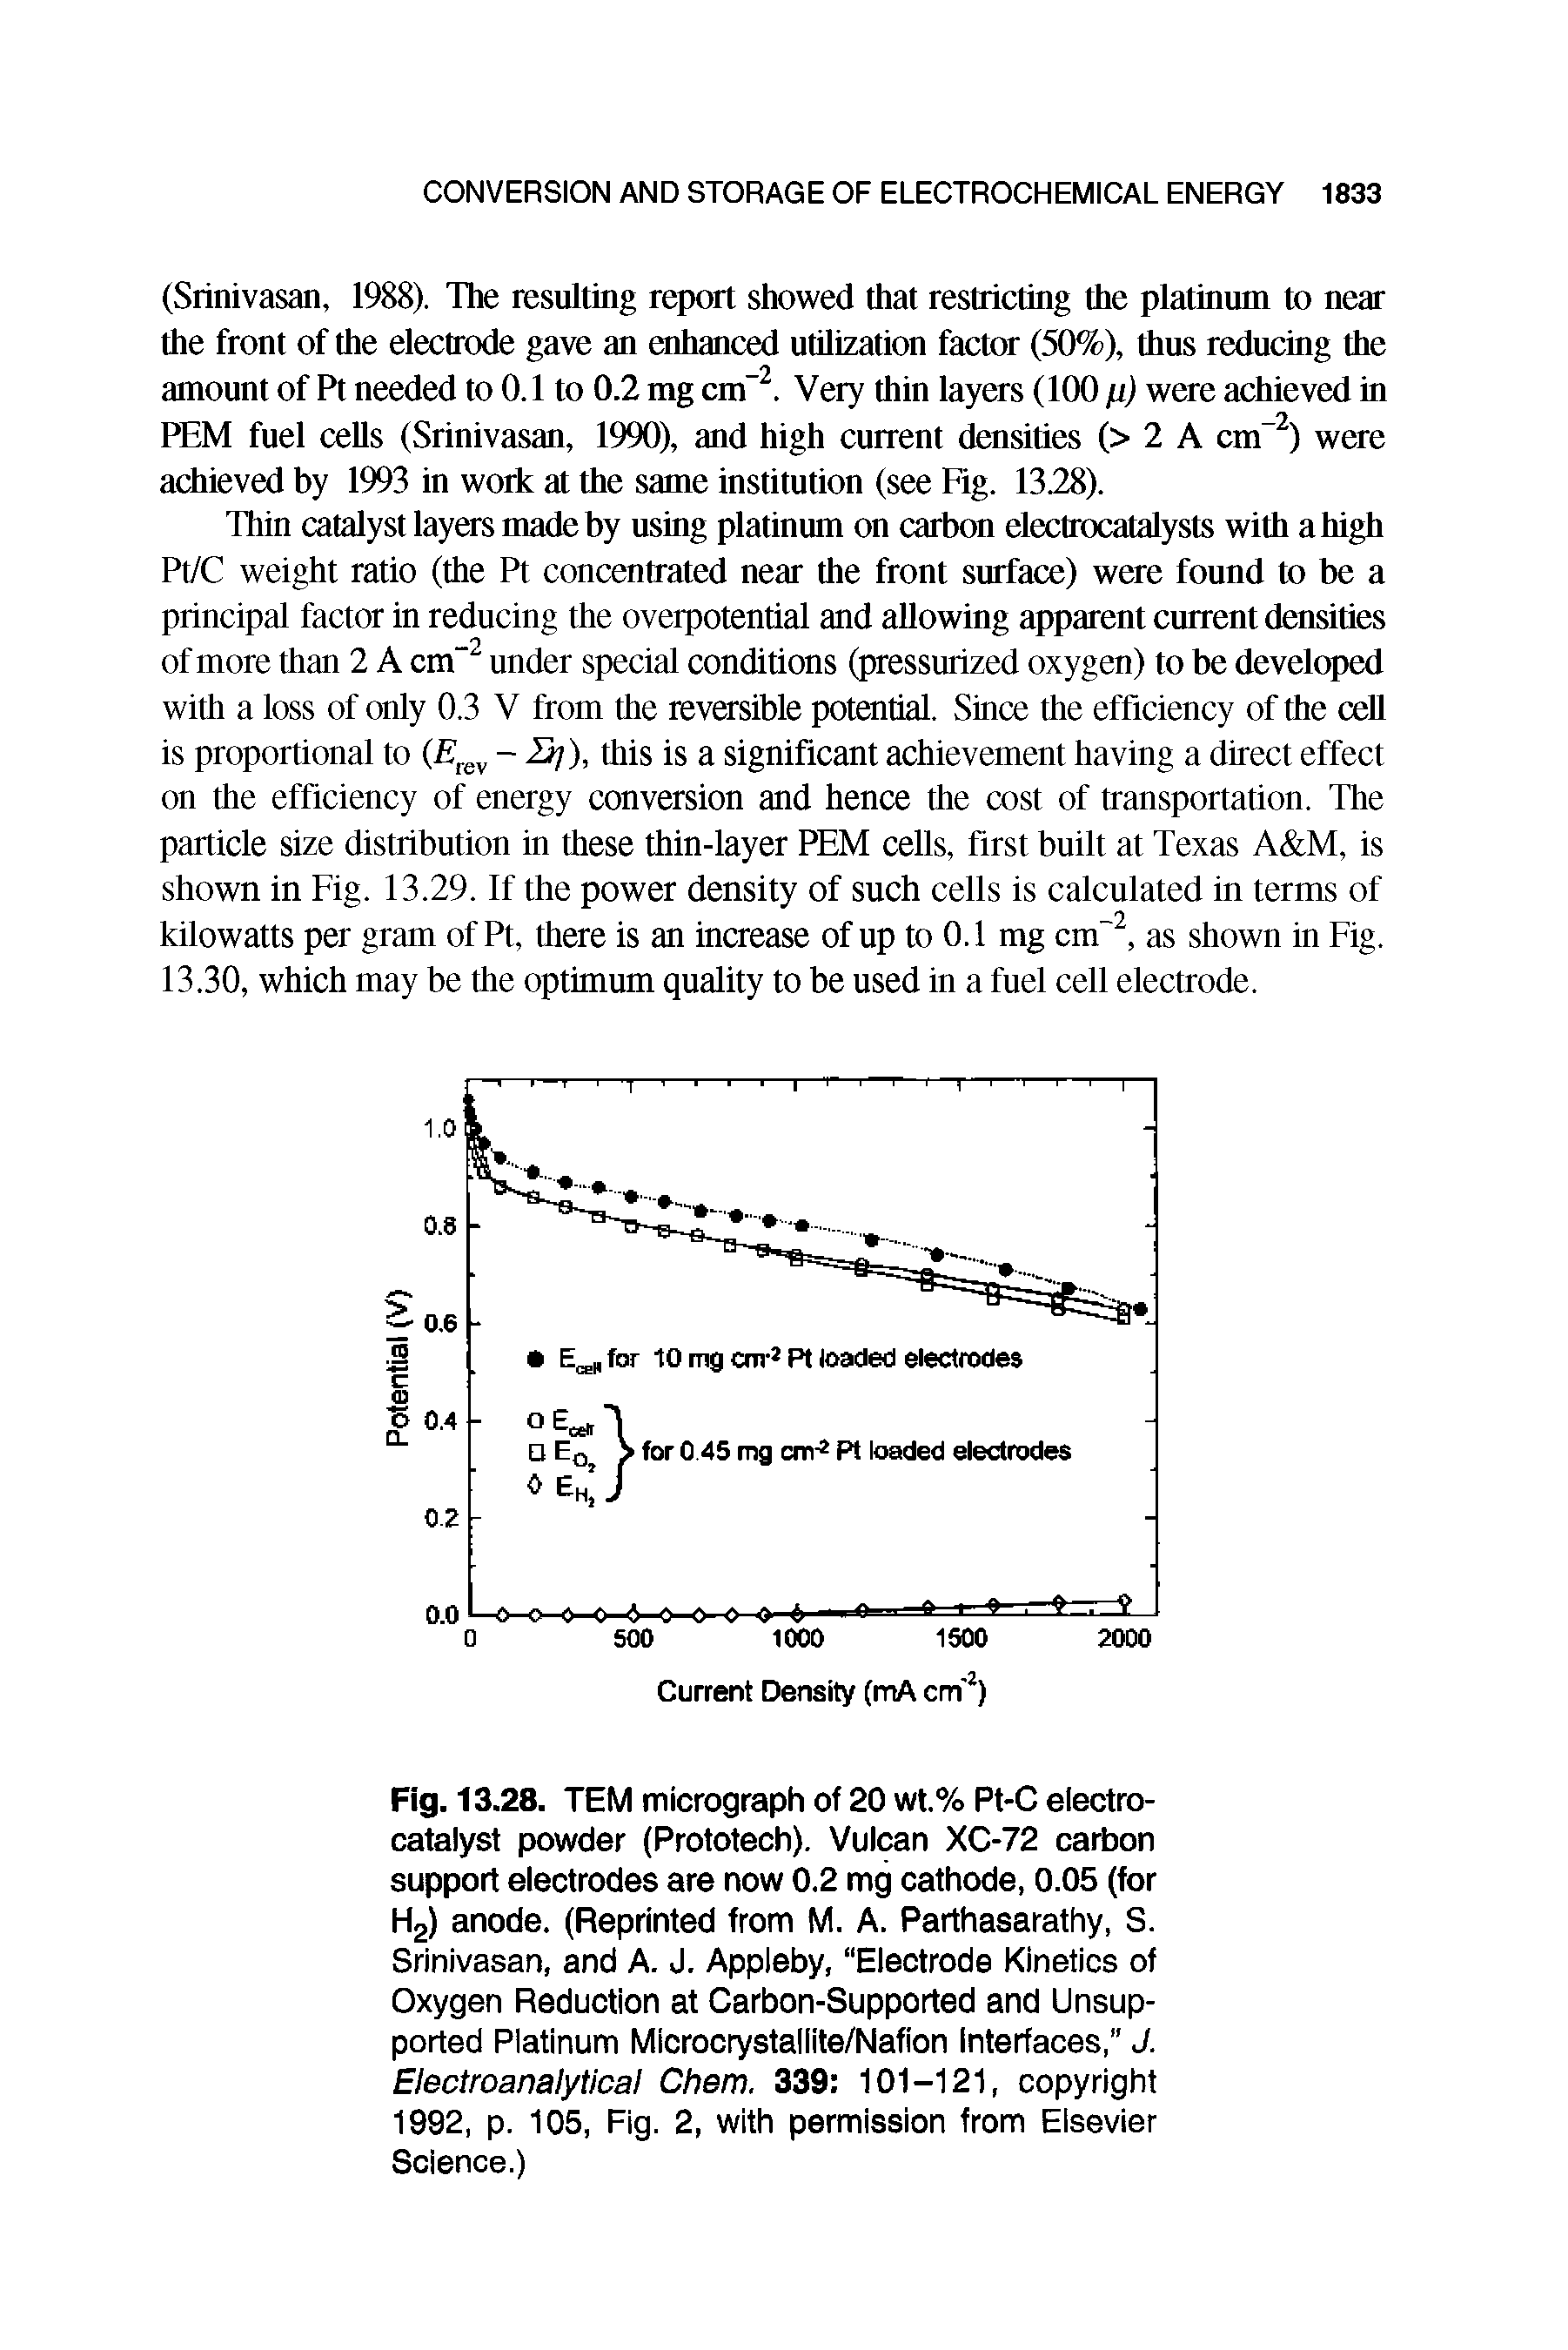 Fig. 13.28. TEM micrograph of 20 wt.% Pt-C electrocatalyst powder (Prototech). Vulcan XC-72 carbon support electrodes are now 0.2 mg cathode, 0.05 (for H2) anode. (Reprinted from M. A. Parthasarathy, S. Srinivasan, and A. J. Appleby, Electrode Kinetics of Oxygen Reduction at Carbon-Supported and Unsupported Platinum Microcrystallite/Nafion Interfaces, J. Electroanalytical Chem. 339 101-121, copyright 1992, p. 105, Fig. 2, with permission from Elsevier Science.)...